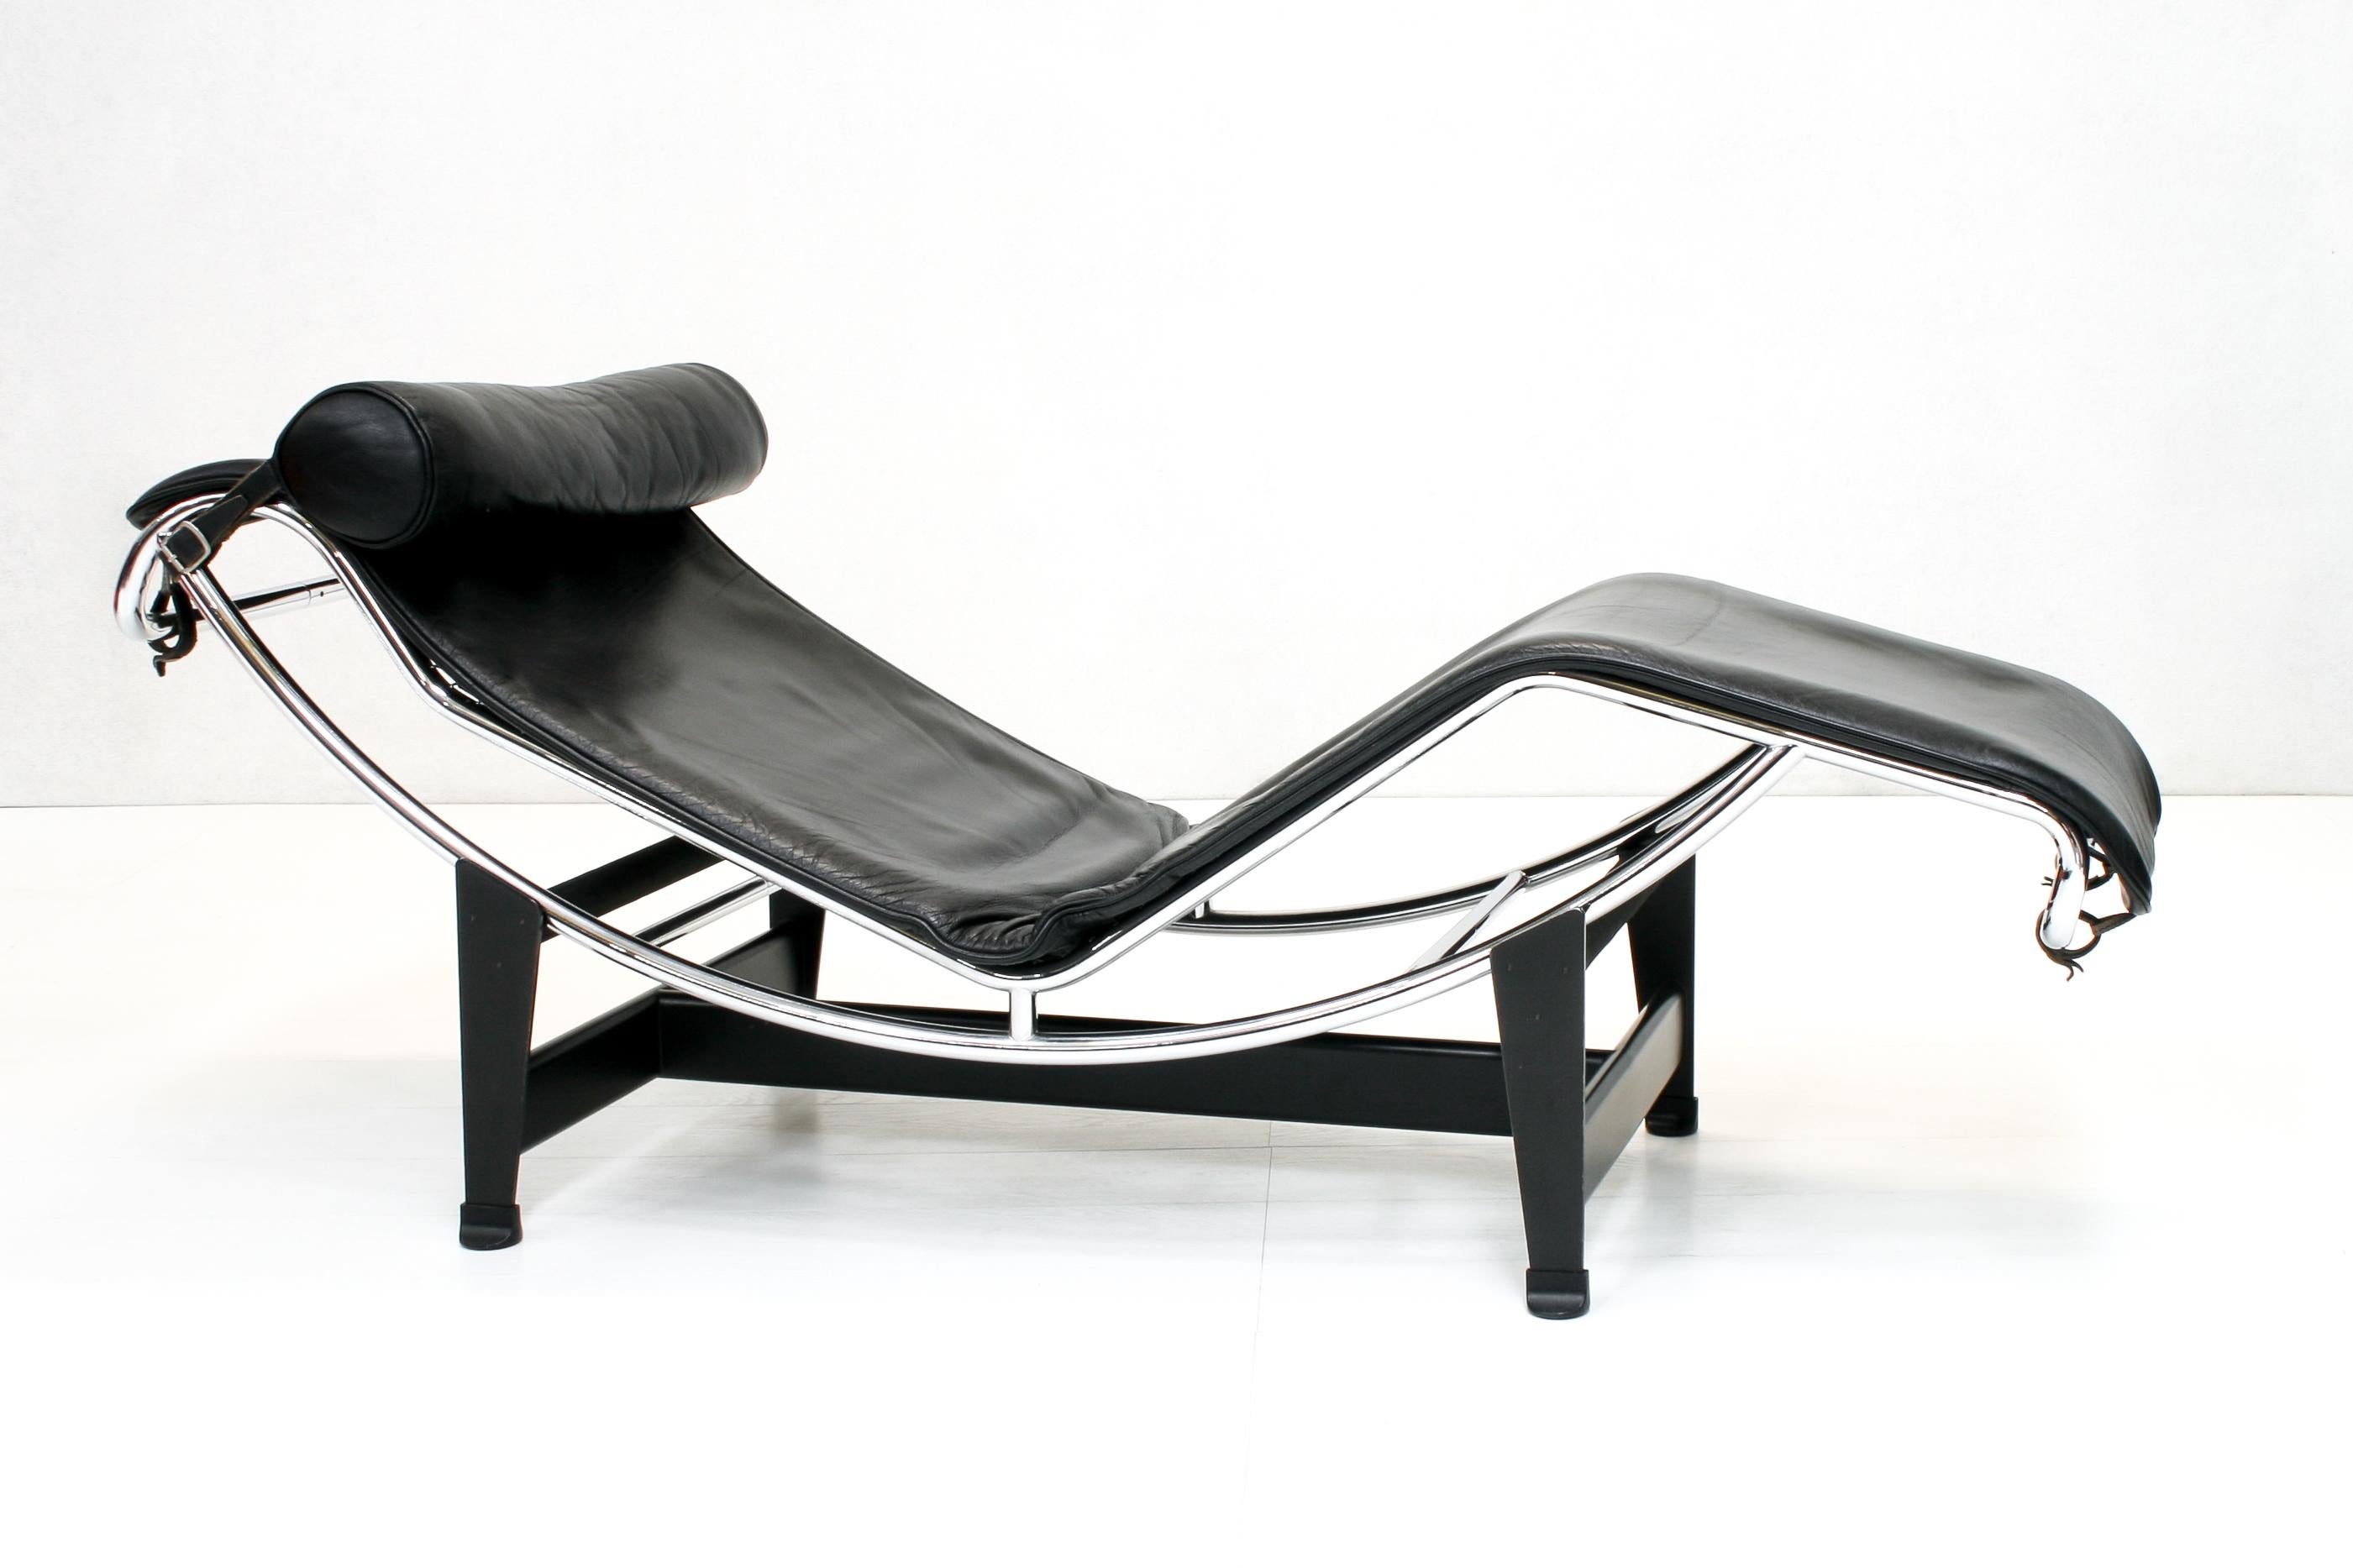 Iconic, original, ageless. Created in 1928 and exhibited at the Paris Salon d’Automne in 1929, Chaise longue à reglage continu embodies the relationship between form and function in the balance between design purity and comfort.

Starting with the